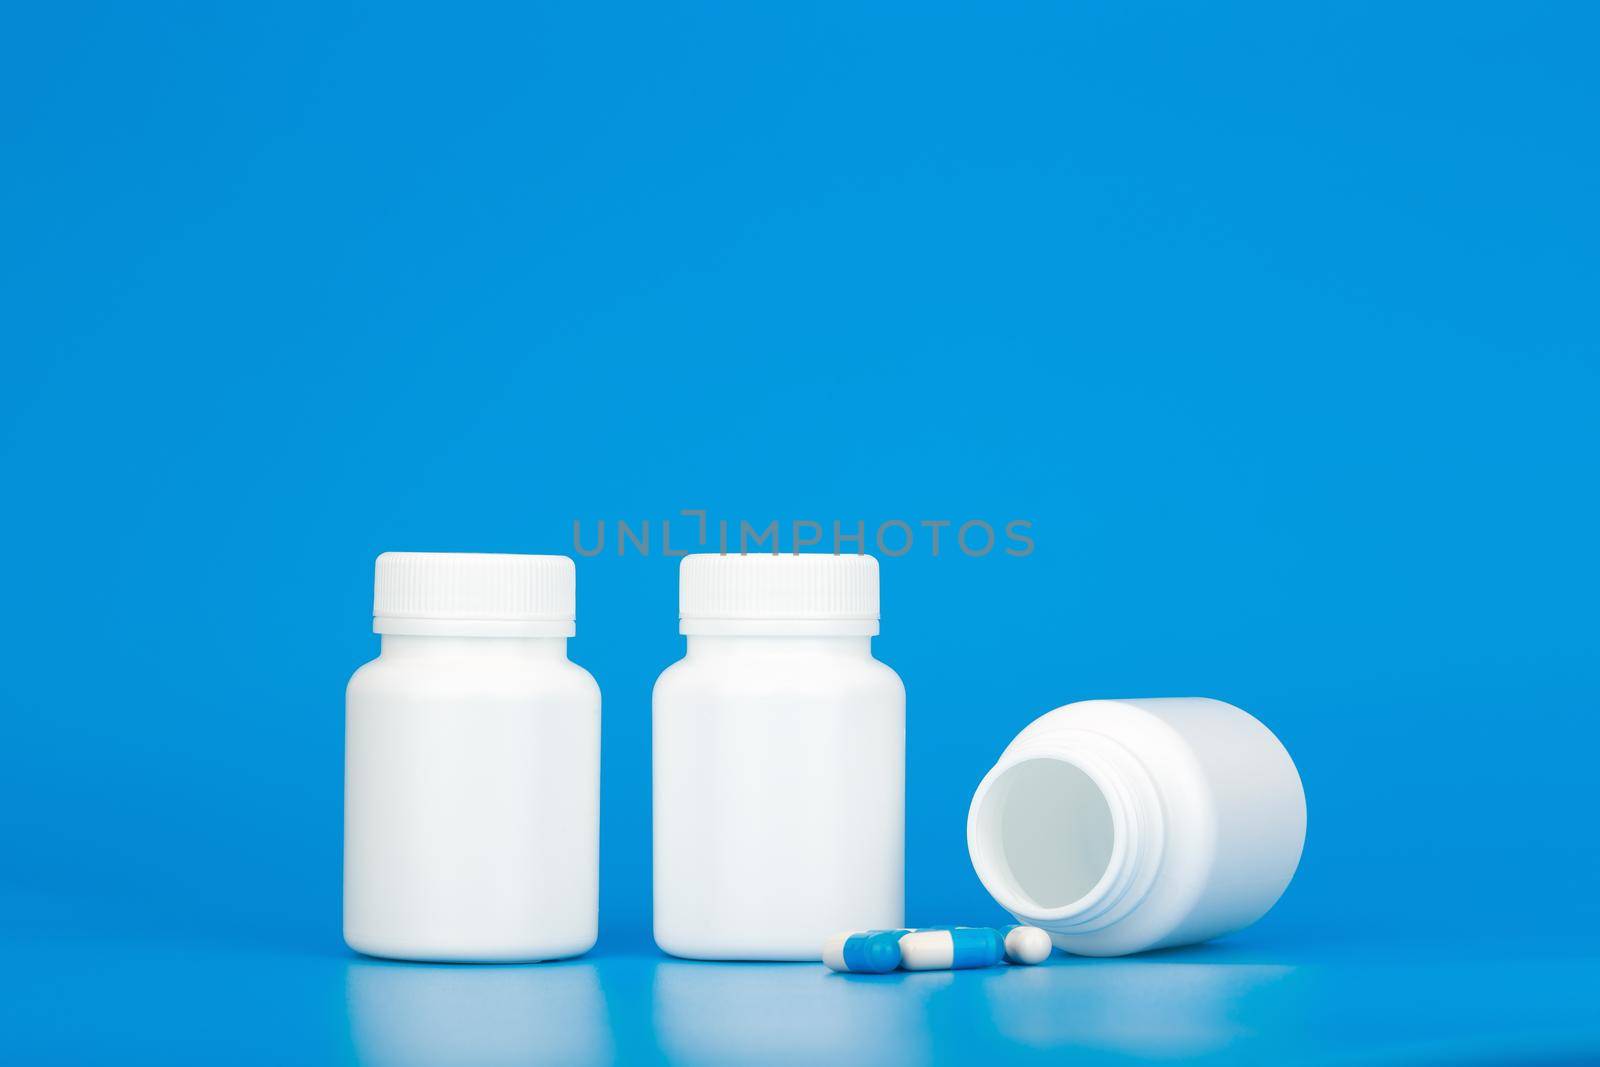 Minimal still life white medication bottles with pills against blue background with copy space. Concept of healthcare and medical treatment